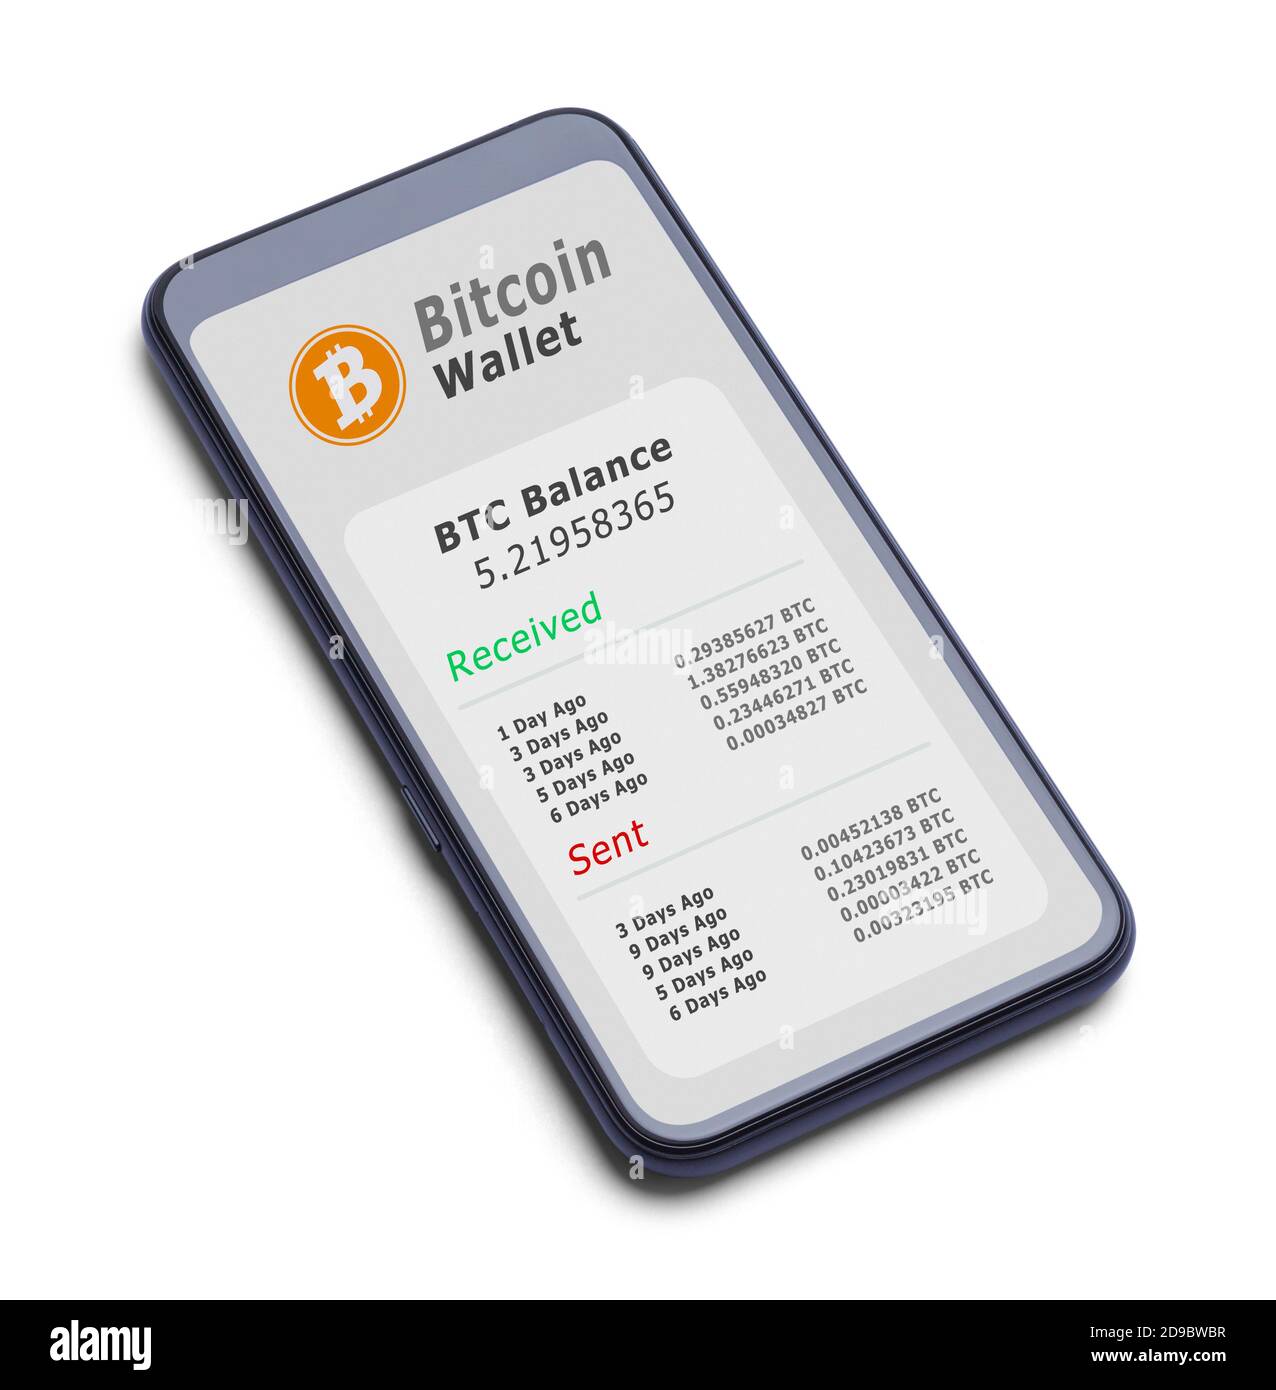 Smart Phone With Bitcoin Wallet Cut Out on White. Stock Photo